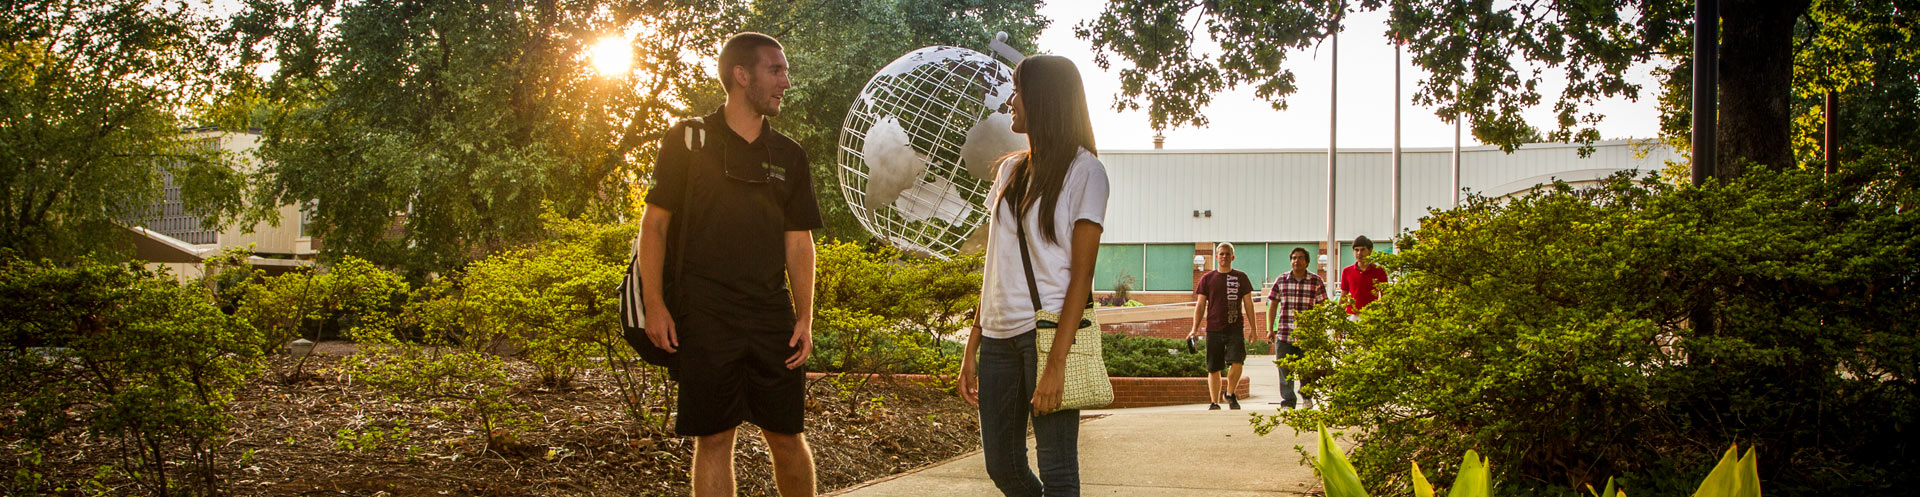 Students walking in front of globe structure in setting sun